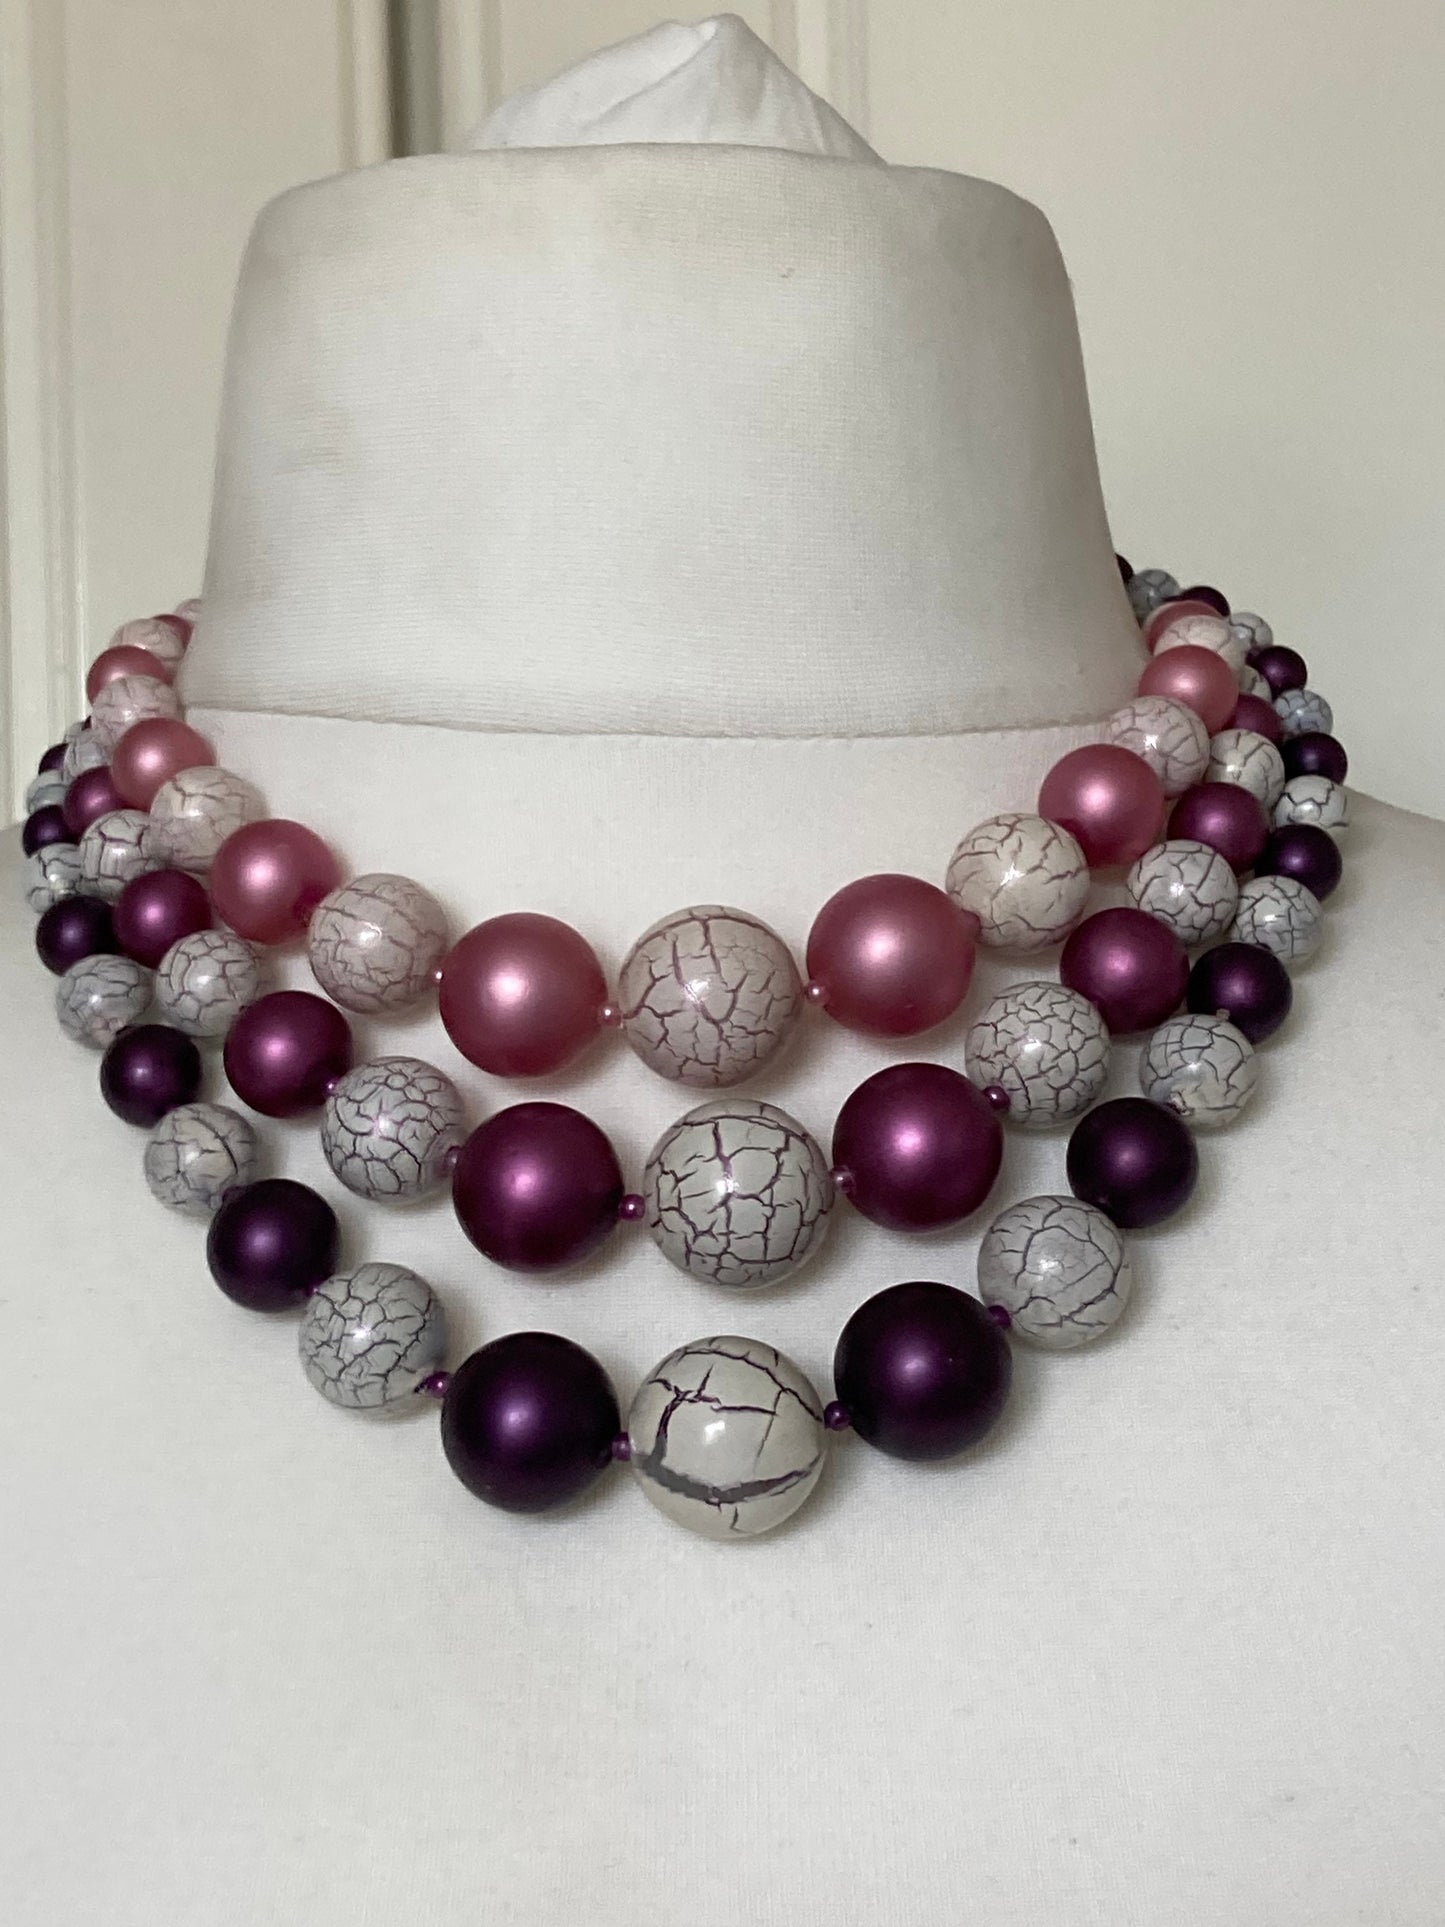 HONG KONG Vintage 1960s multi strand pink purple crackle plastic pearl beaded waterfall necklace